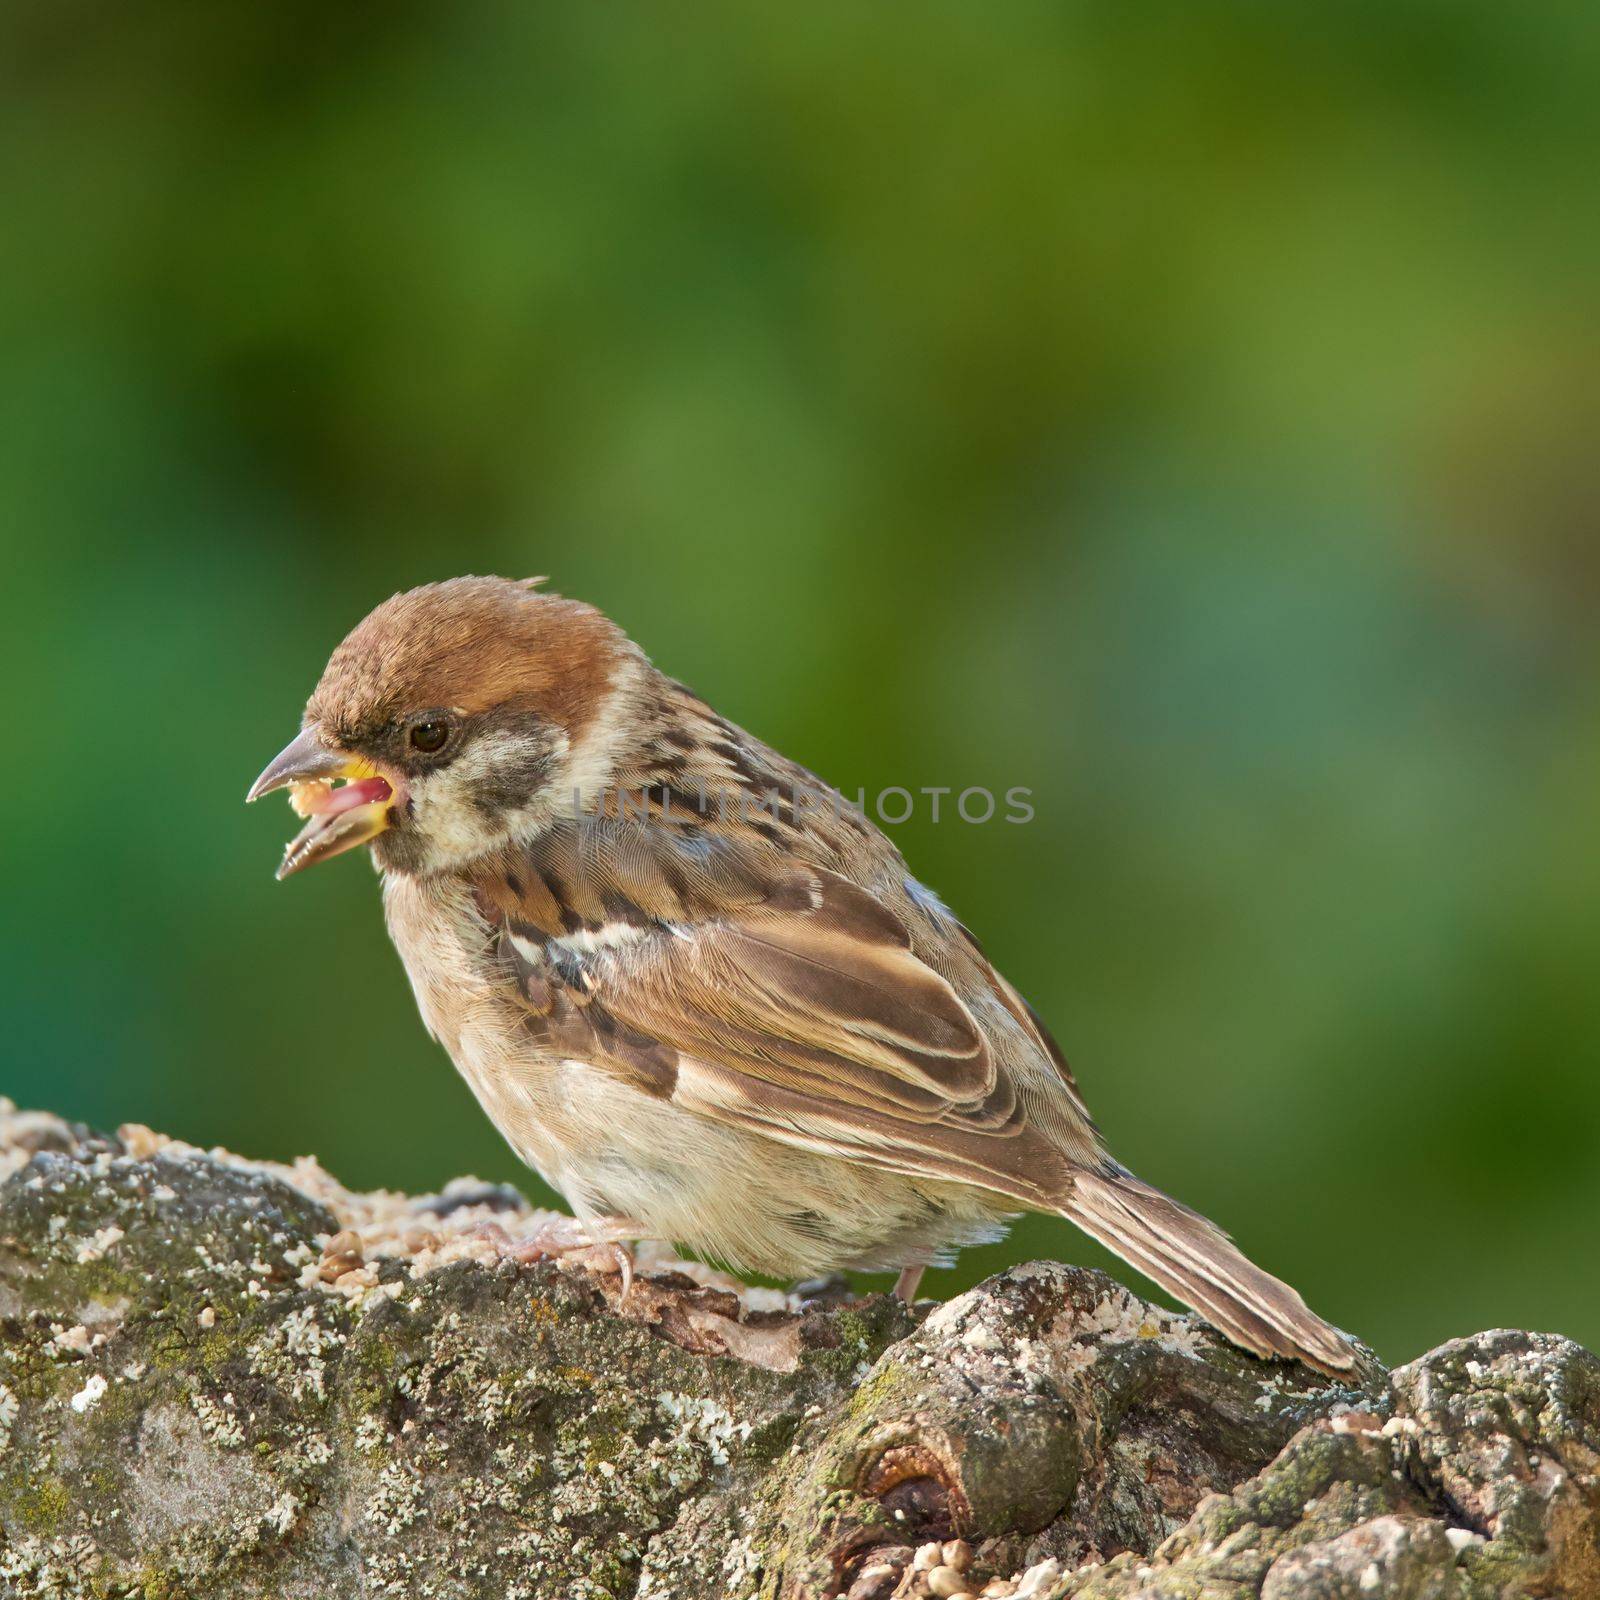 Sparrow. Sparrows are a family of small passerine birds, Passeridae. They are also known as true sparrows, or Old World sparrows, names also used for a particular genus of the family, Passer. by YuriArcurs